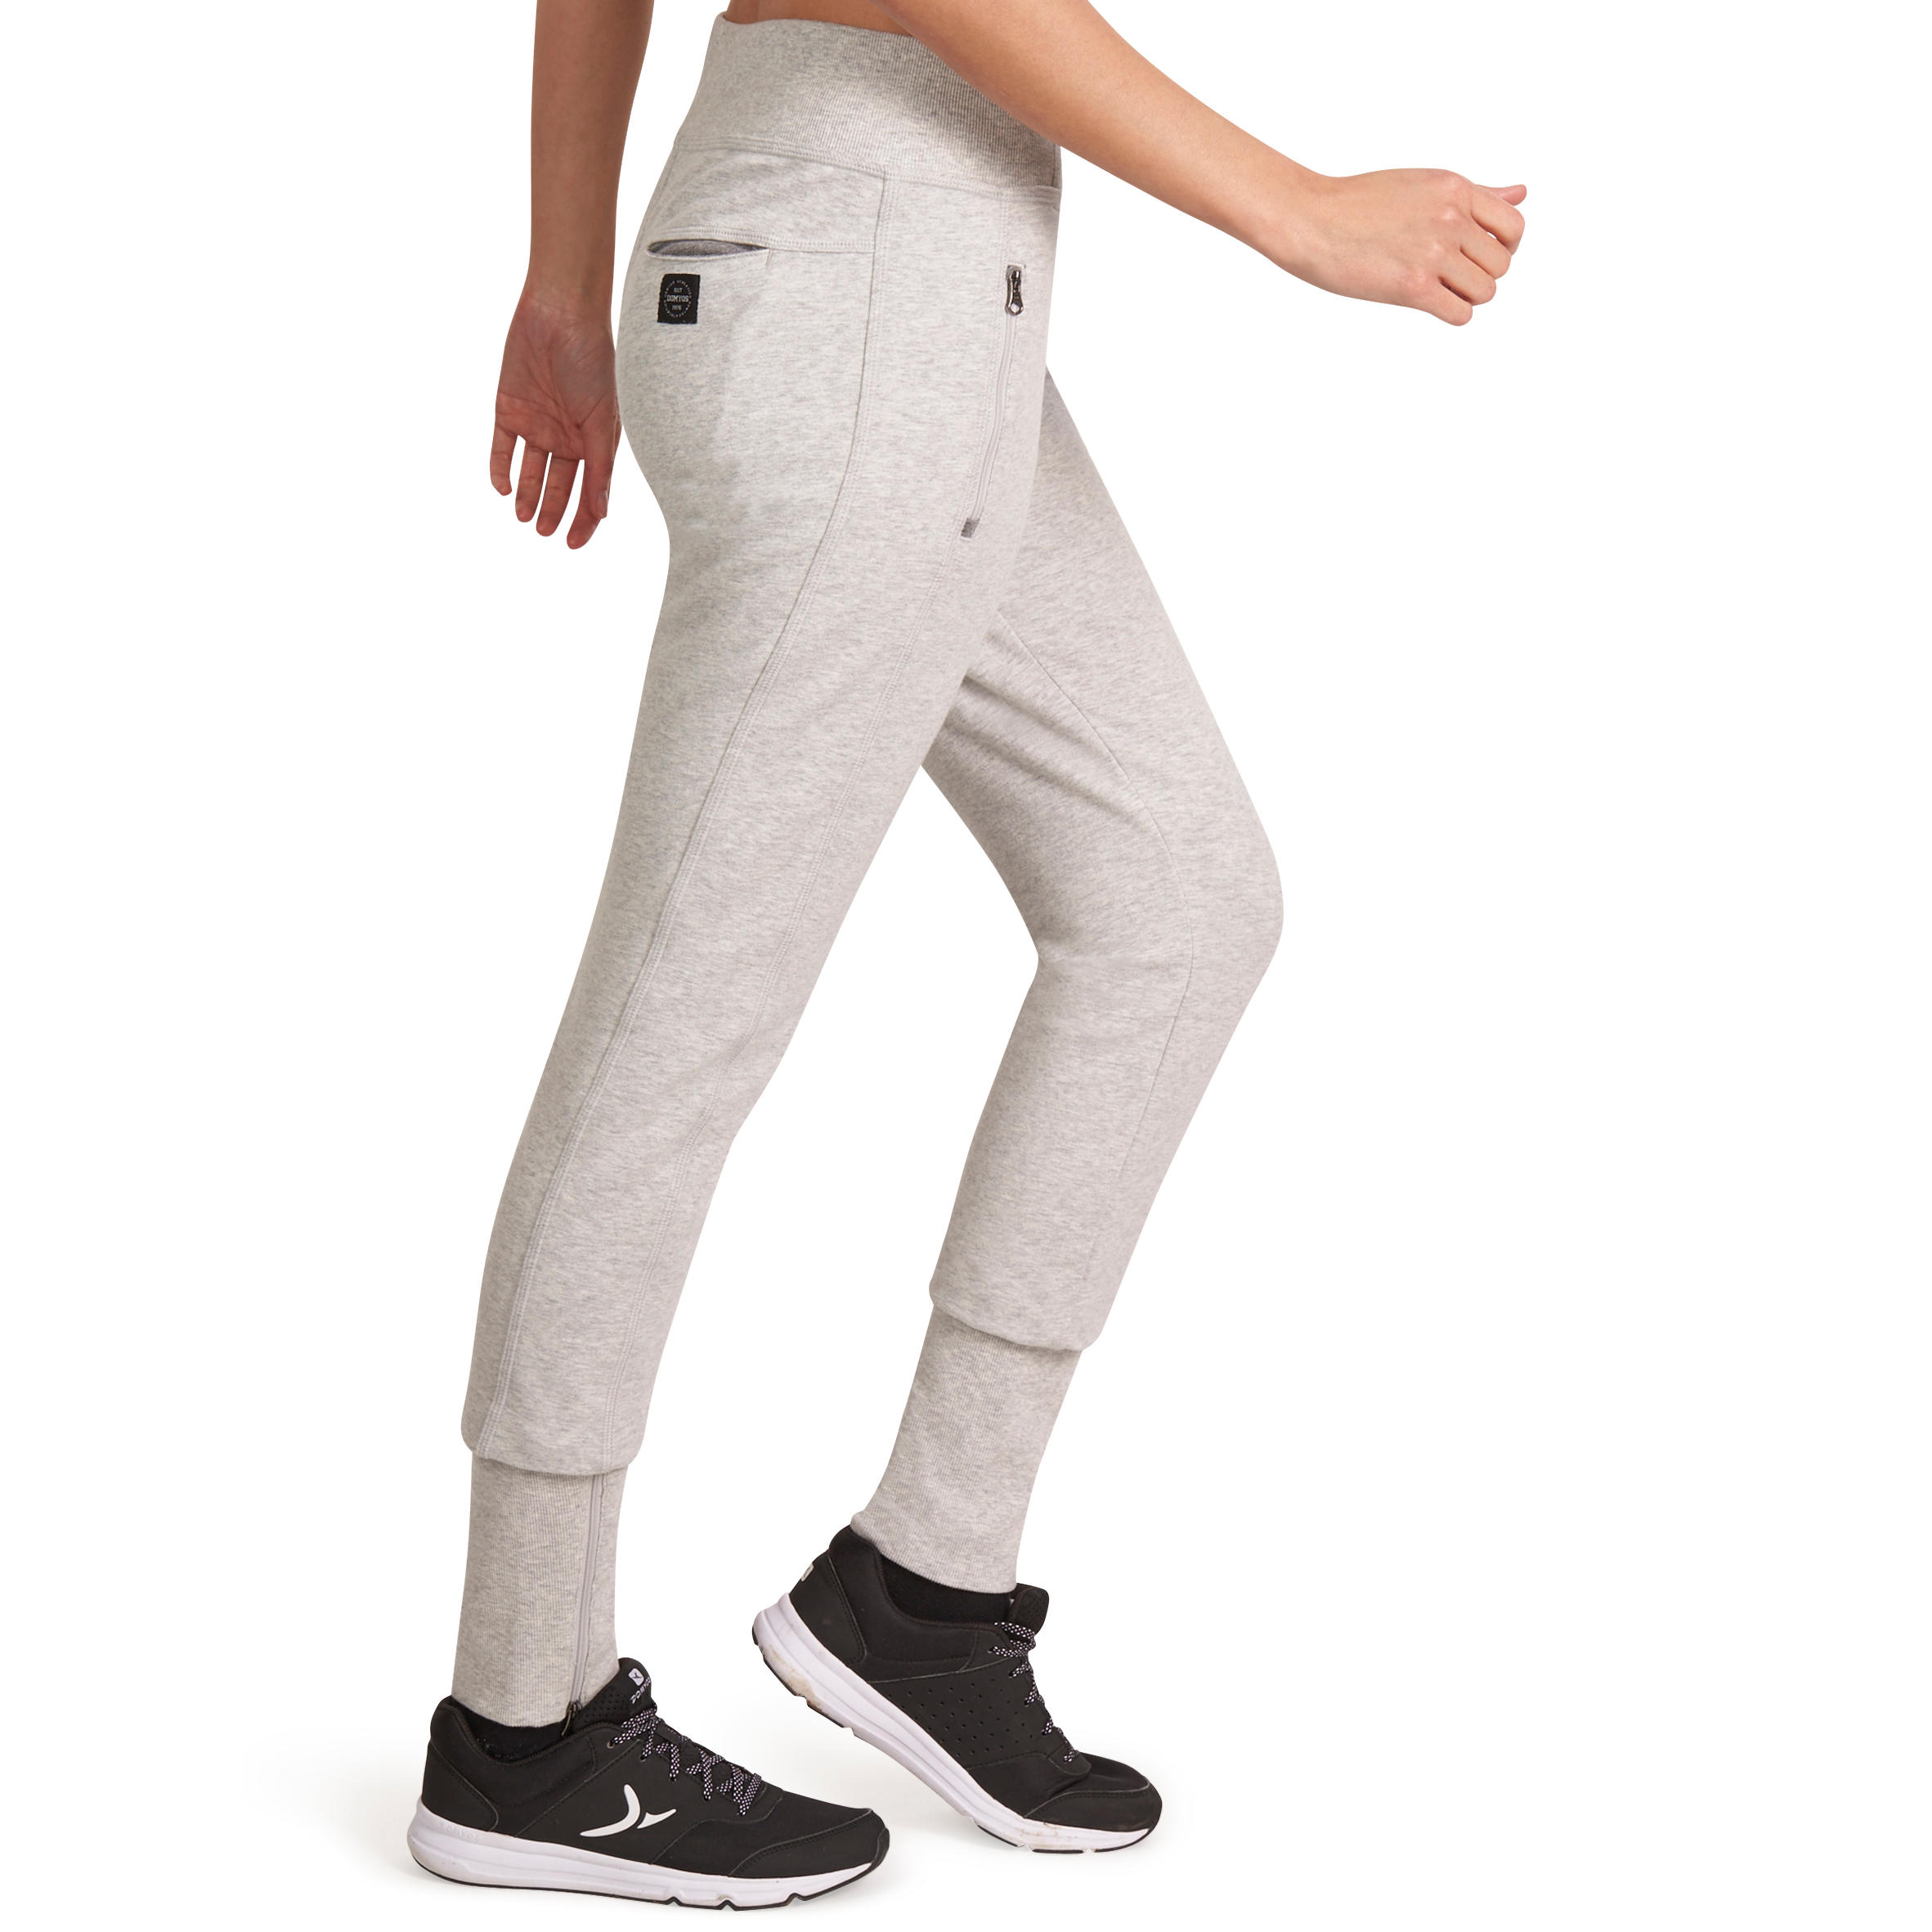 920 Women's Slim-Fit Gym & Pilates Bottoms with Zip Ankles - Light Mottled Grey 3/14